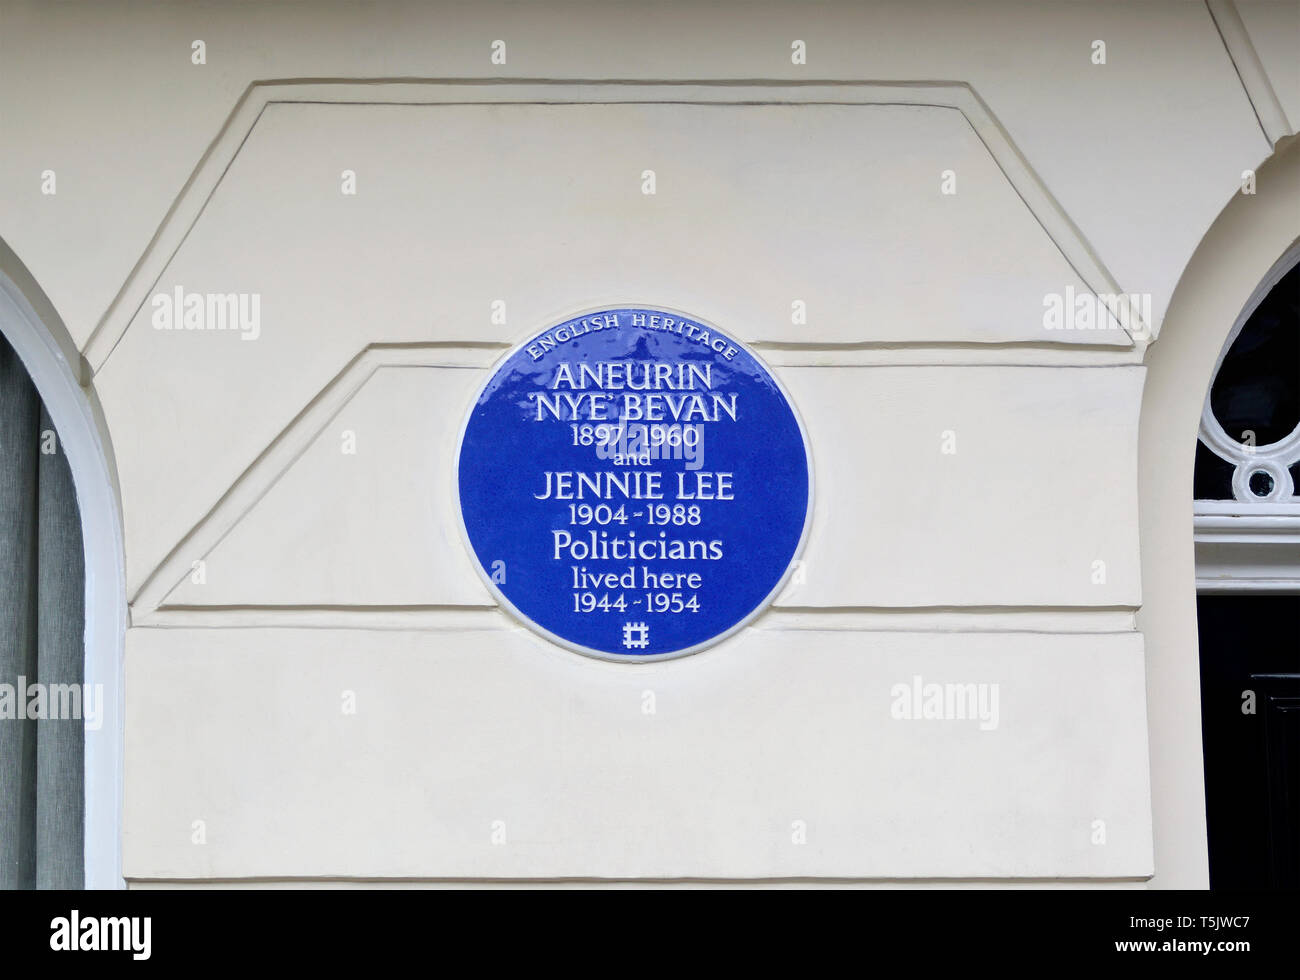 London, England, UK. Commemorative Blue Plaque: Aneurin ‘Nye’ Bevan and Jennie Lee (respectively founders of the NHS and the Open University) lived .... Stock Photo